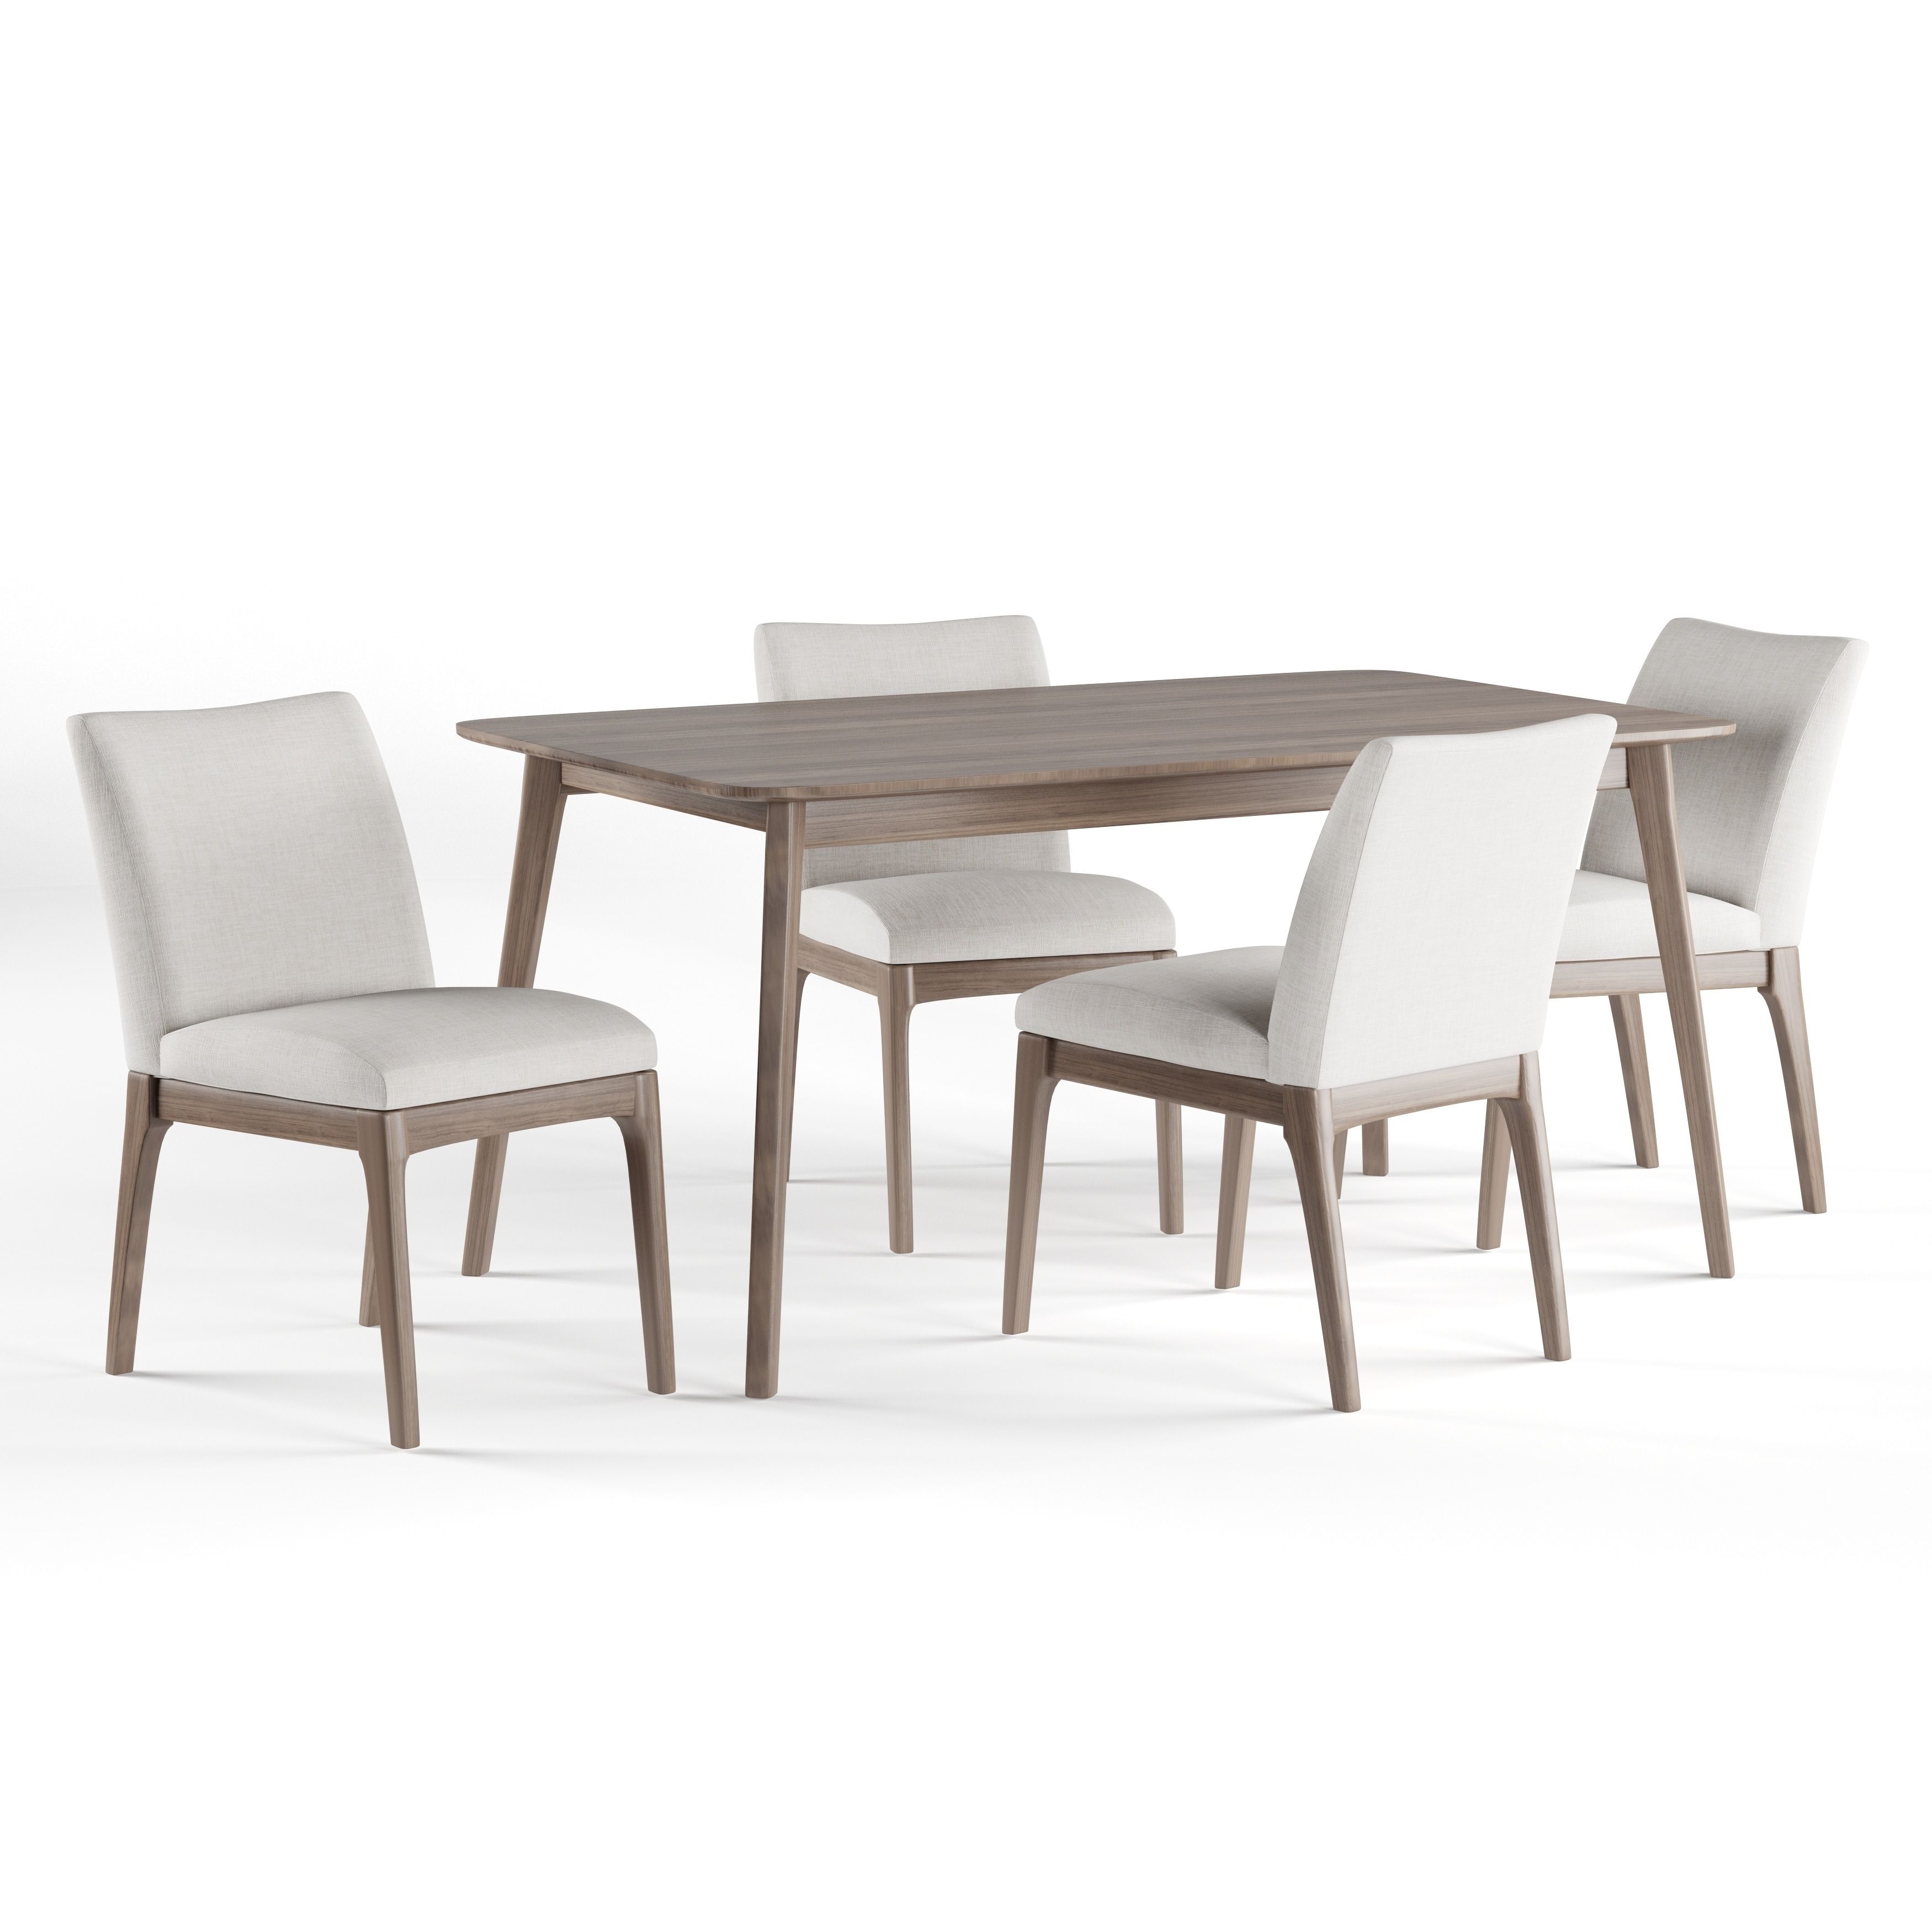 Toby 7 Piece Dining Setorren Ellis Reviews Intended For Most Popular Helms 7 Piece Rectangle Dining Sets With Side Chairs (View 5 of 20)